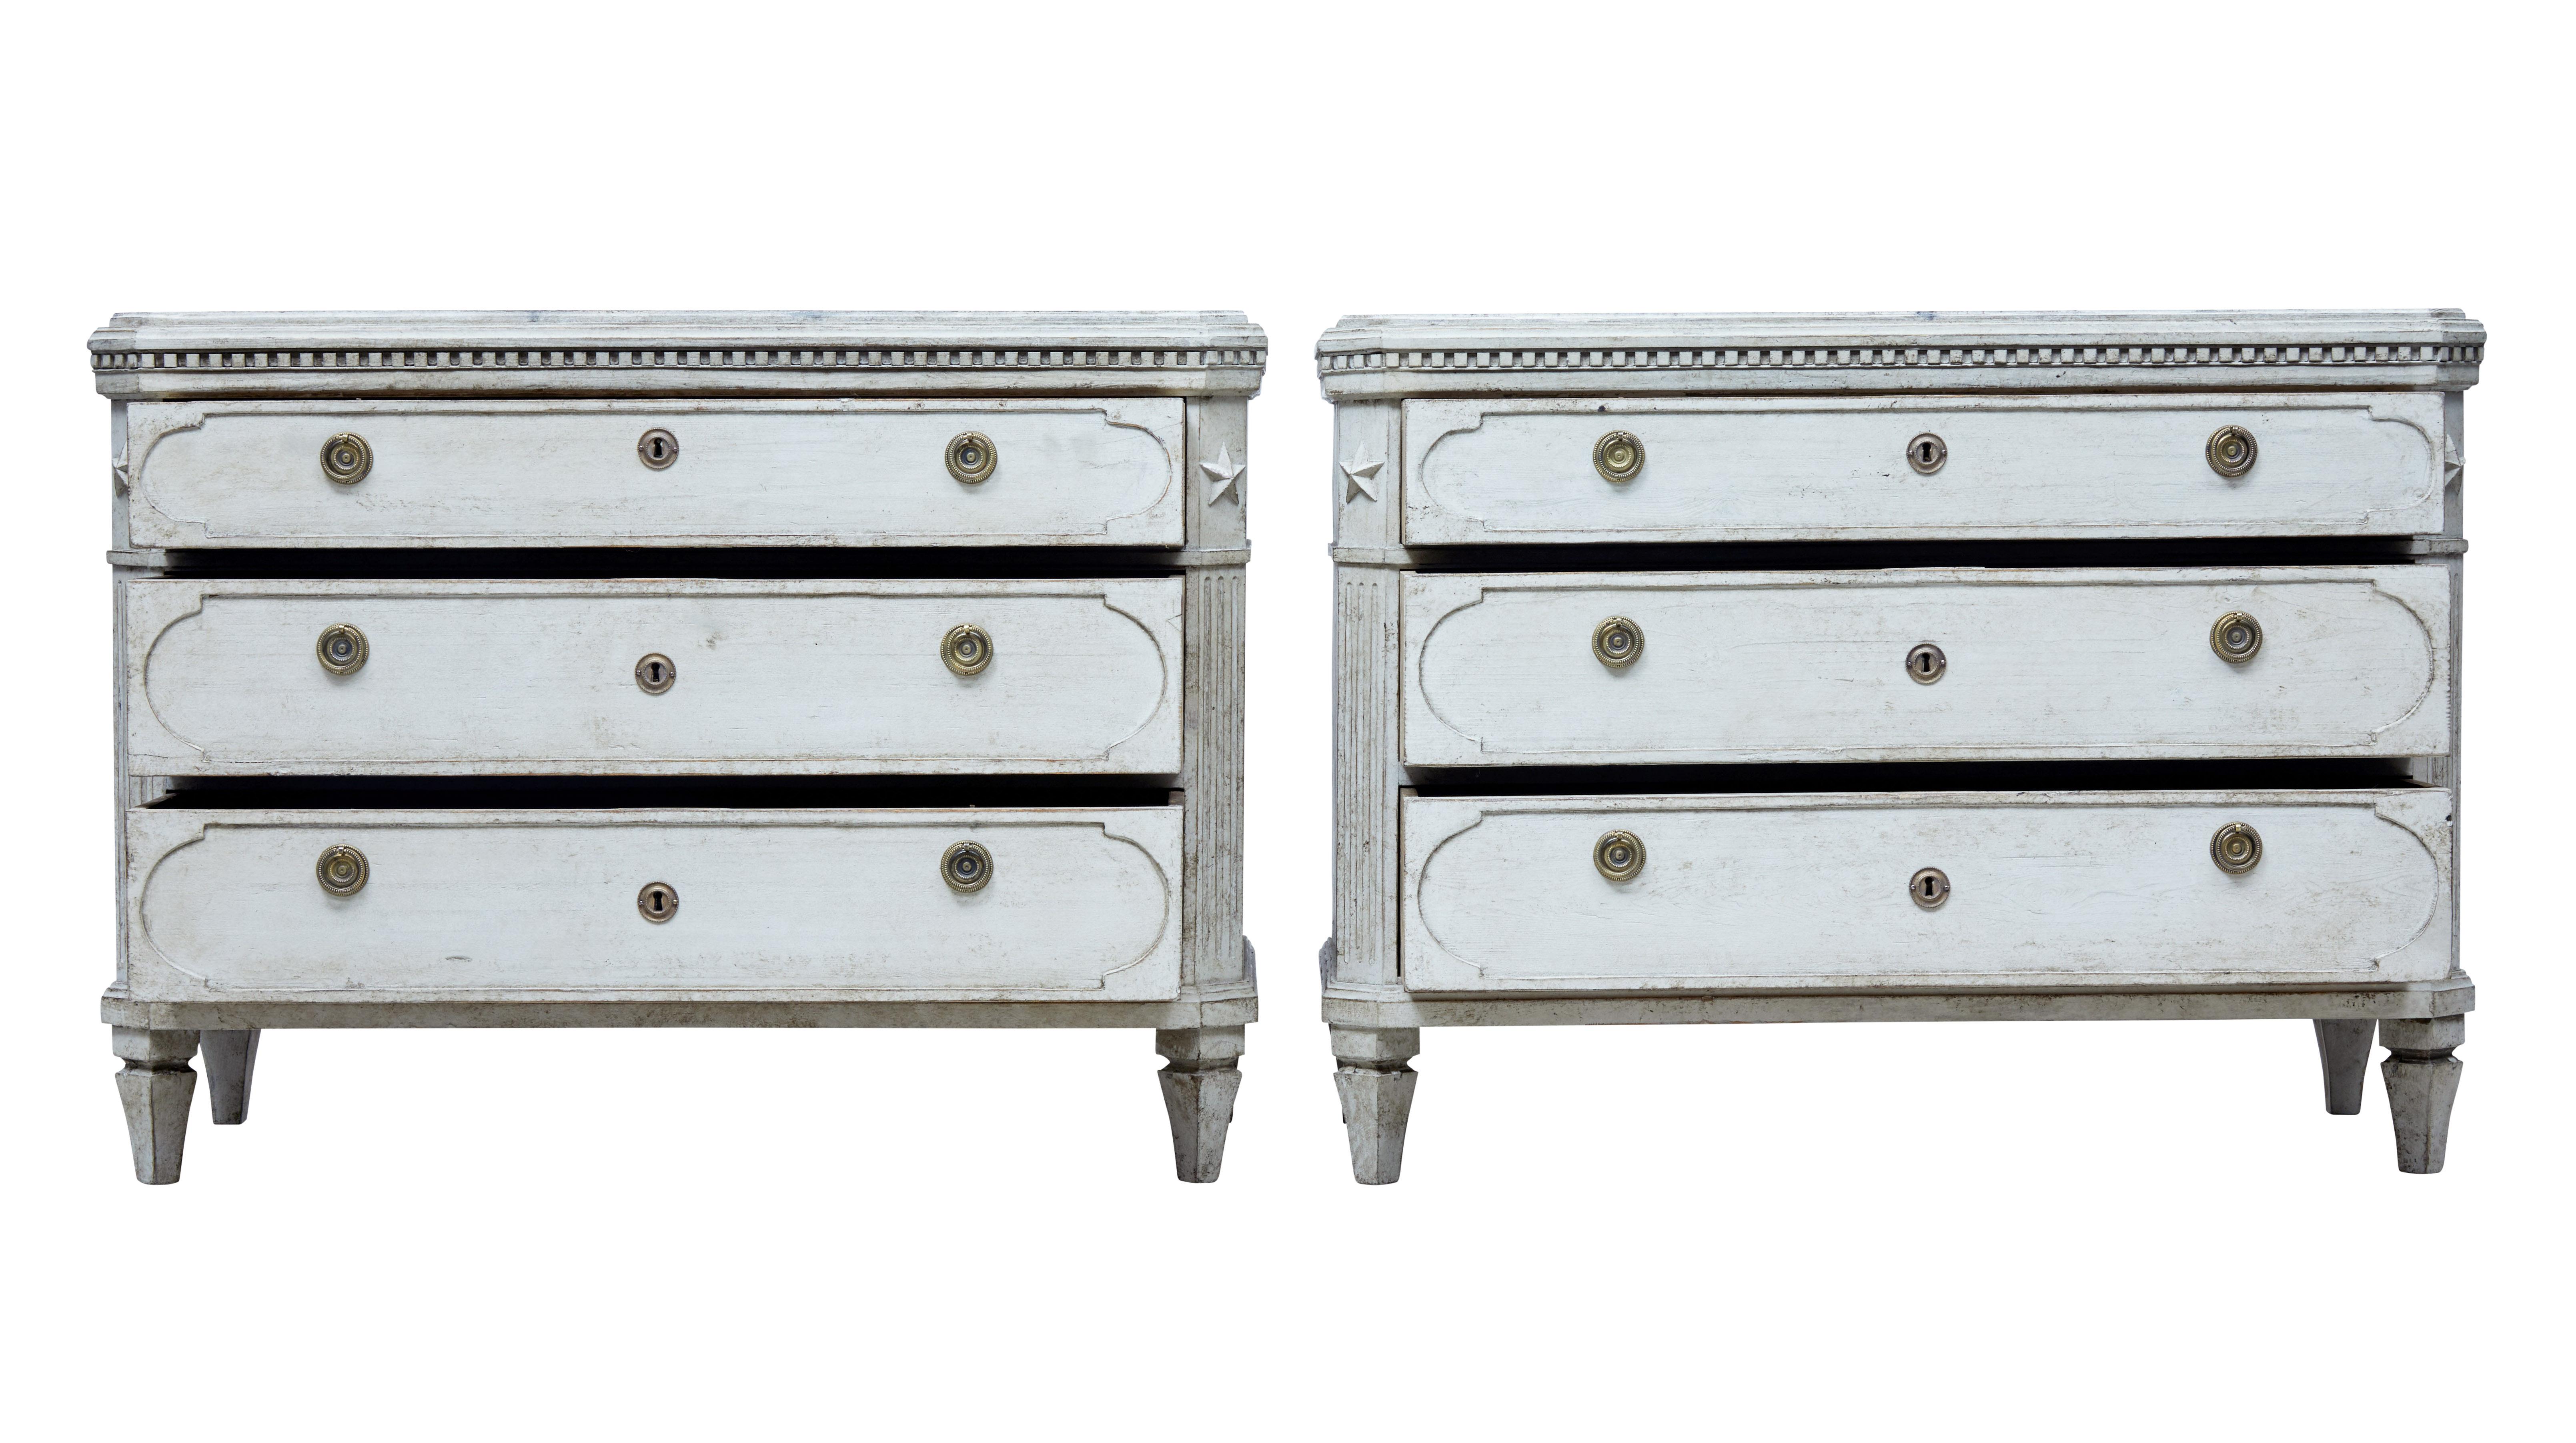 Fine pair of 19th century Swedish oak chest of drawers, circa 1870.

Faux marble hand painted top surface, dentil frieze below the top surface, 3 drawers with detailed fronts, ring handles and escutcheons. Canted corners with star motif.

Oak